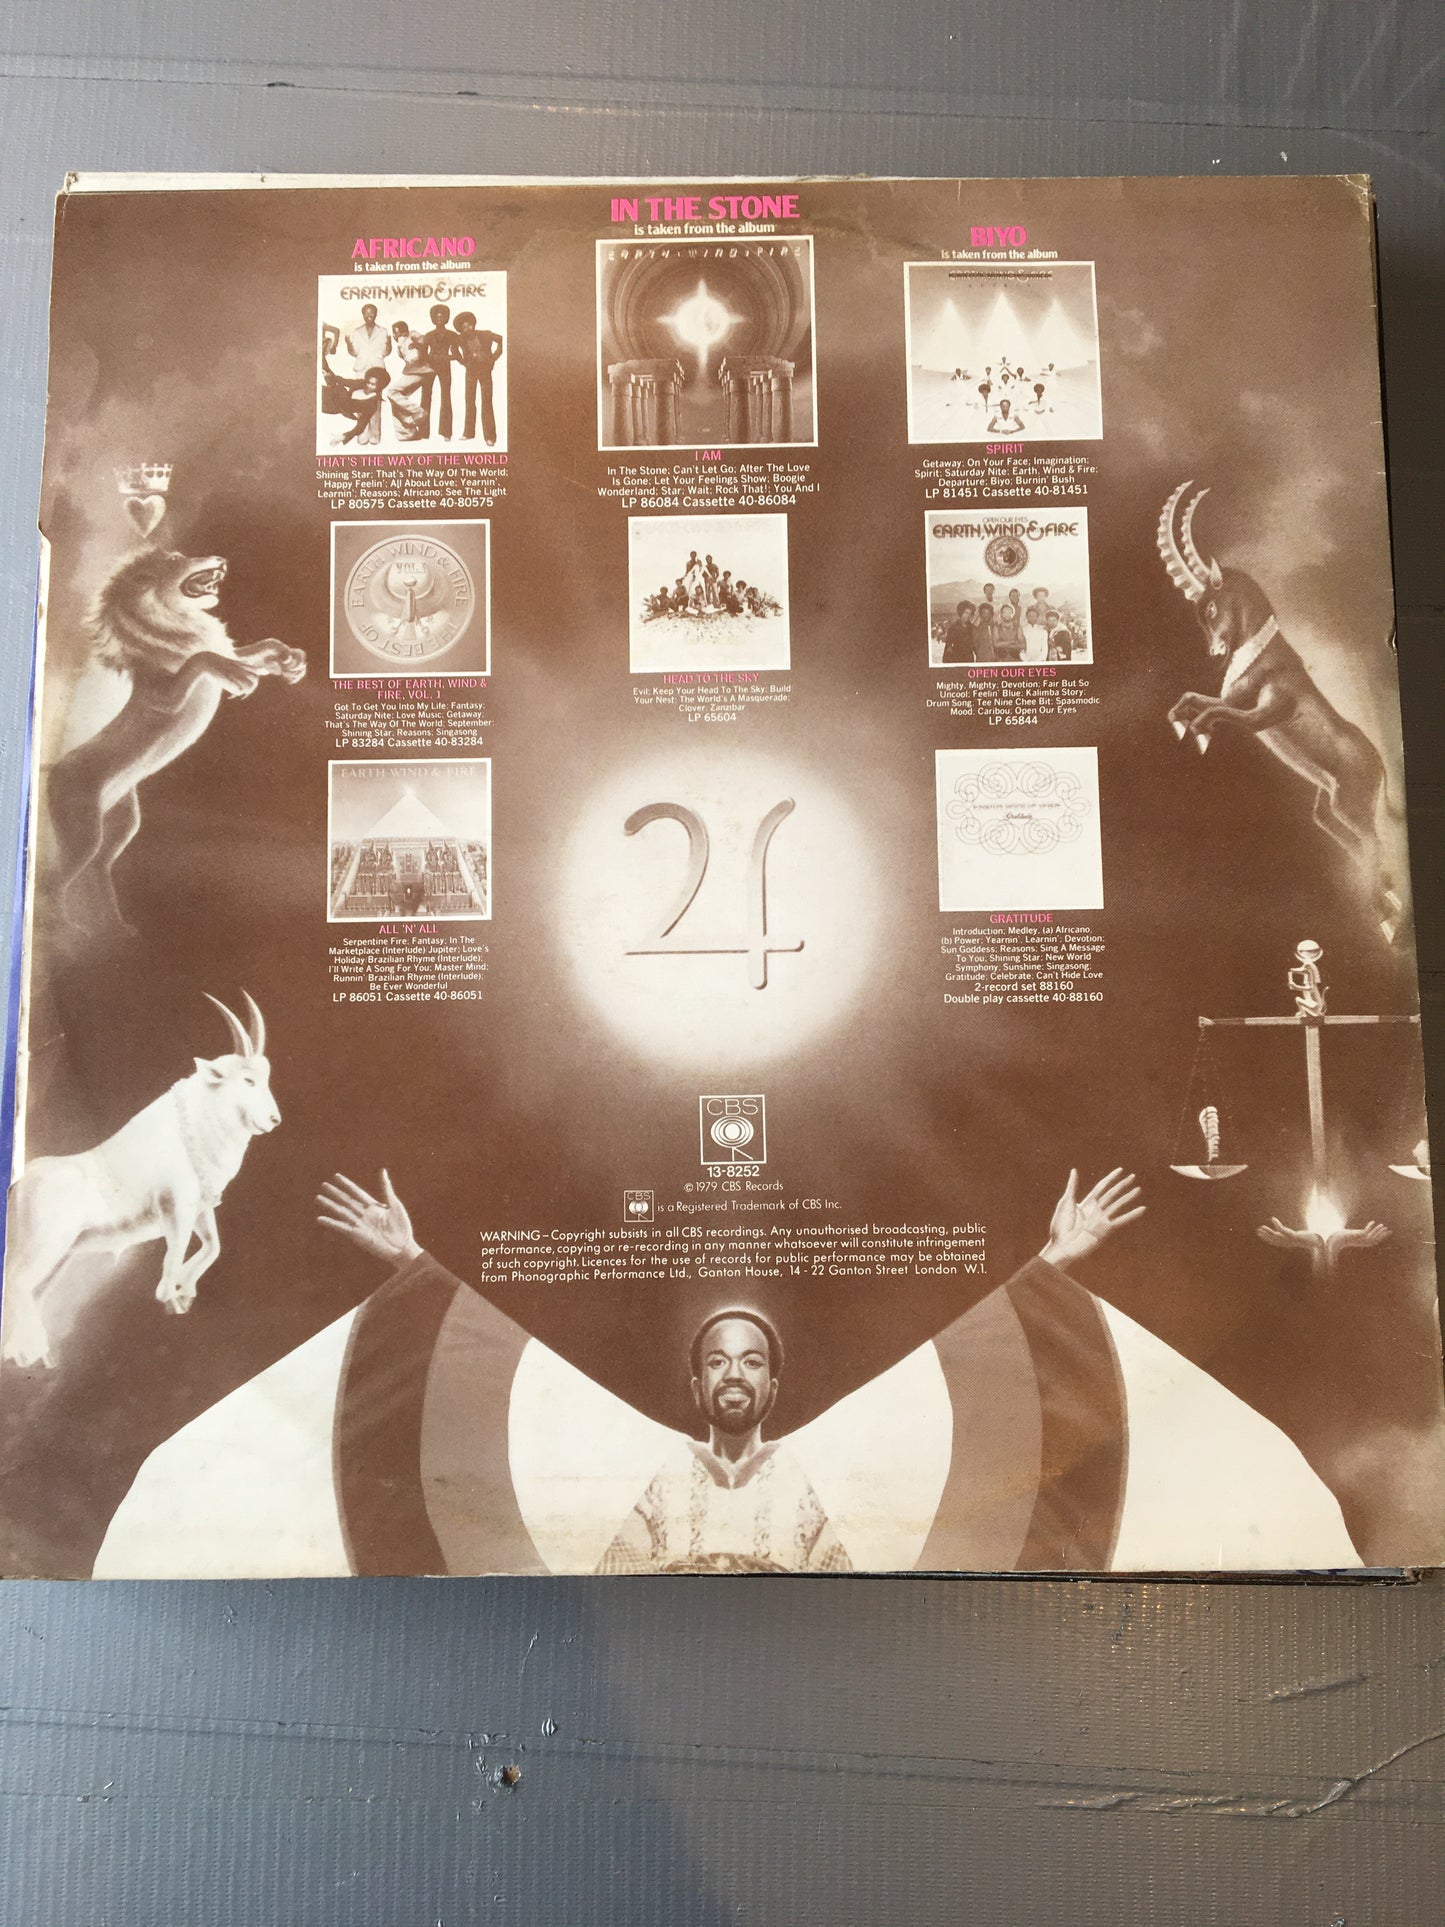 EARTH WIND & FIRE 12” IN THE STONE